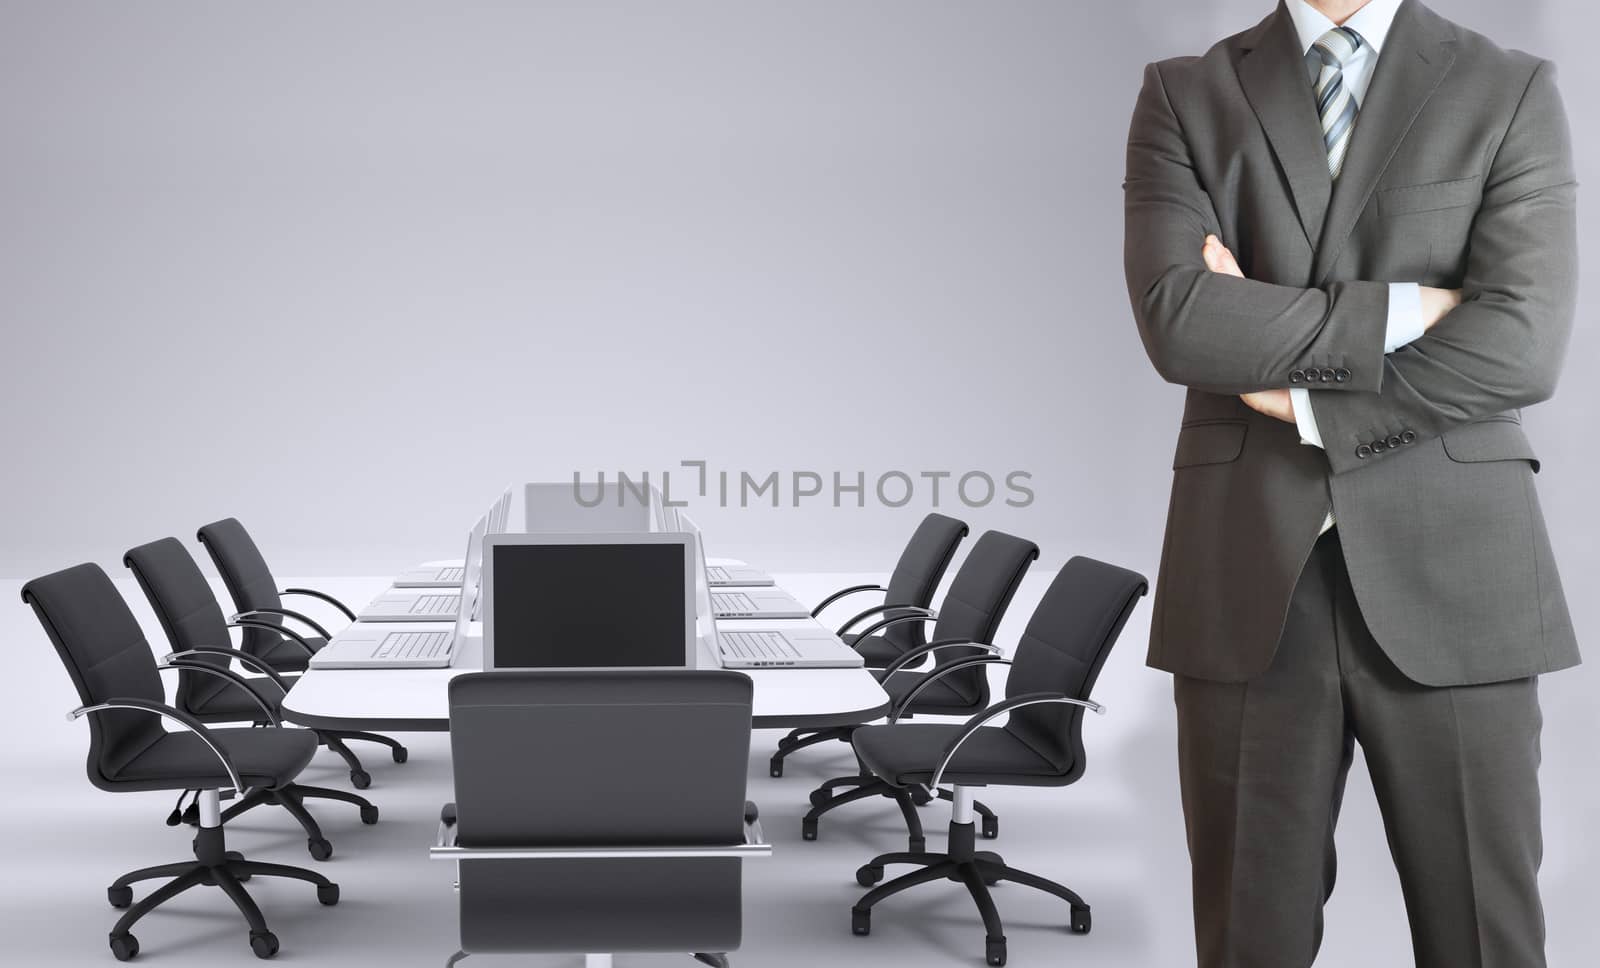 Businessman standing with his arms crossed. Conference table, chairs and laptops as backdrop